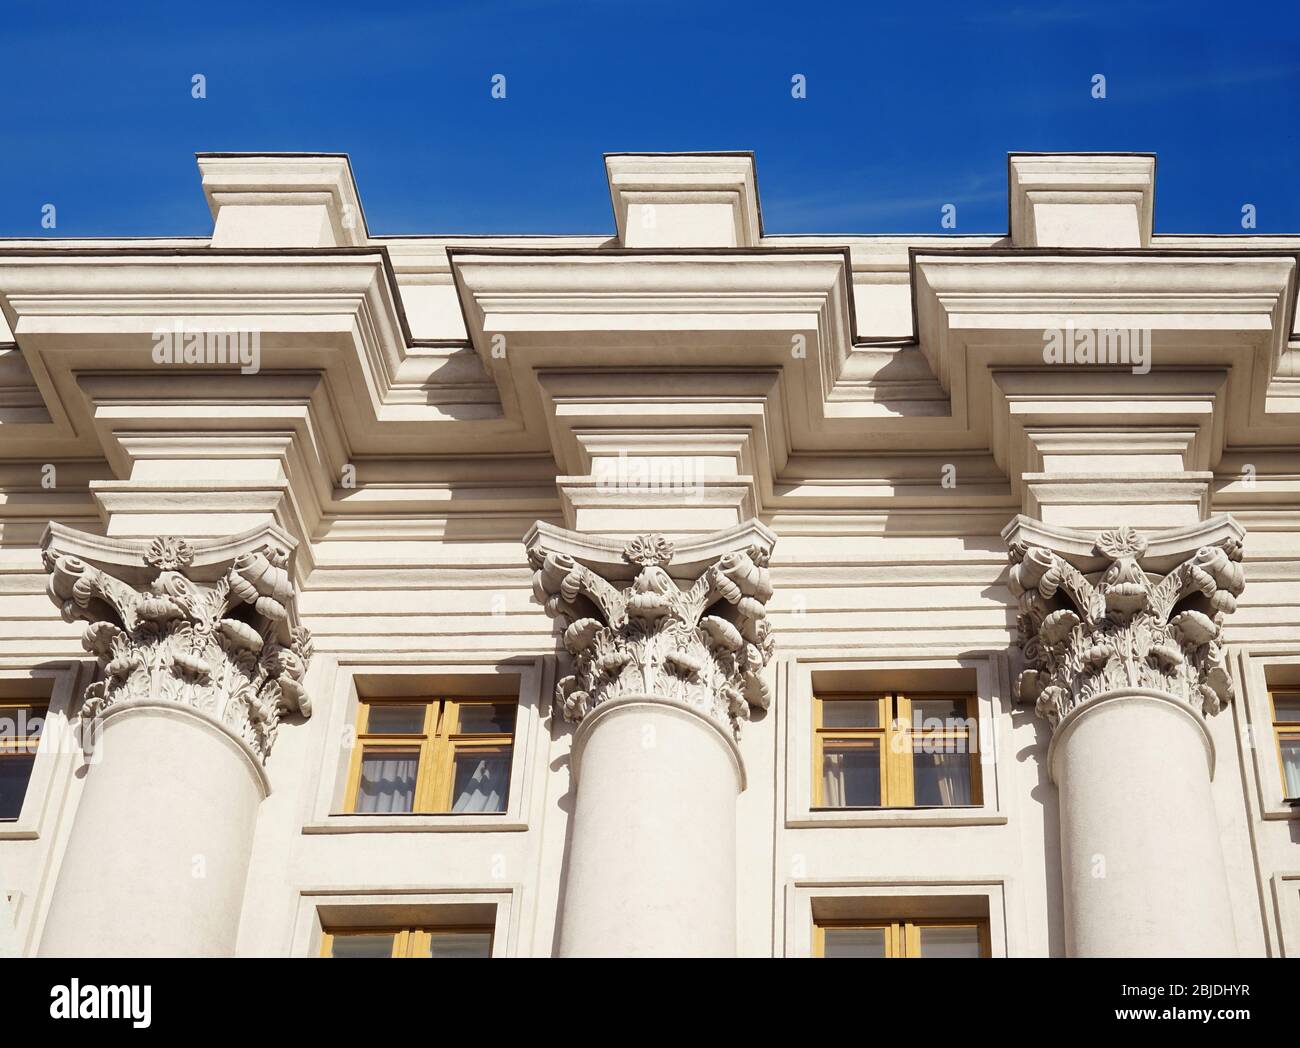 Design of building in neoclassical style Stock Photo